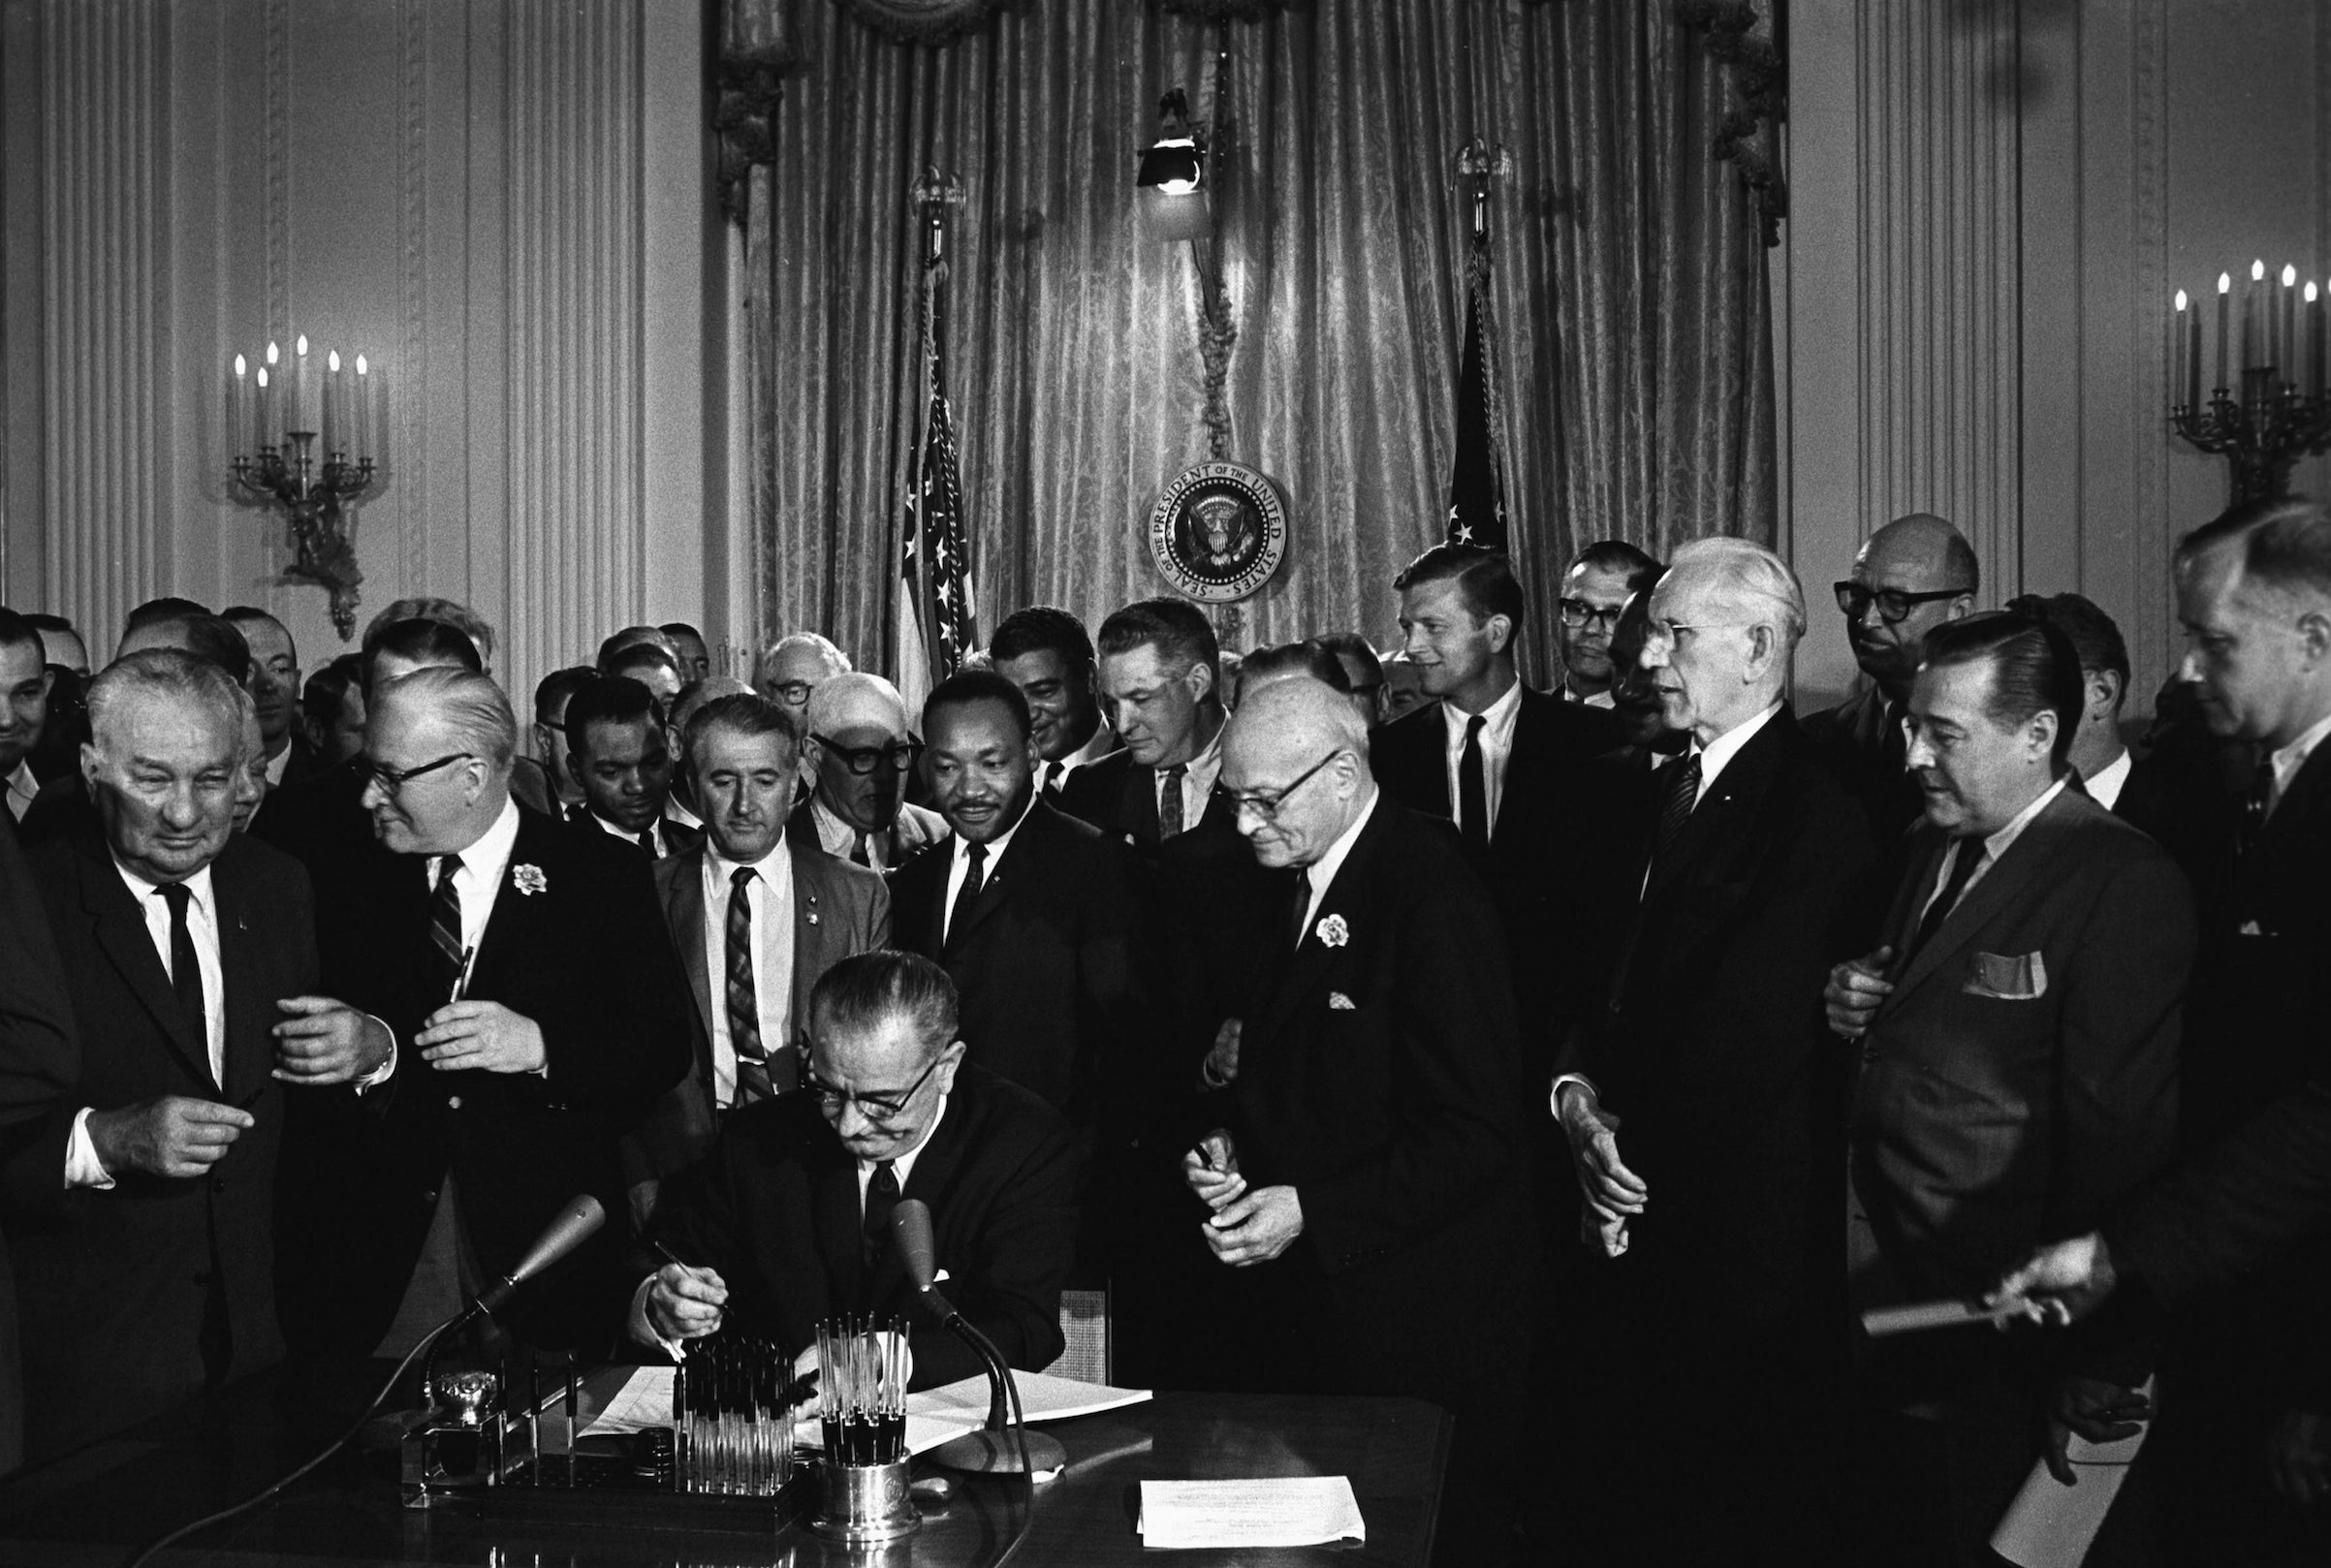 President Lyndon Johnson, seated, signing Civil Rights Act. Behind Johnson is Martin Luther King Jr. 1964. (Universal History Archive/Getty Imagse)